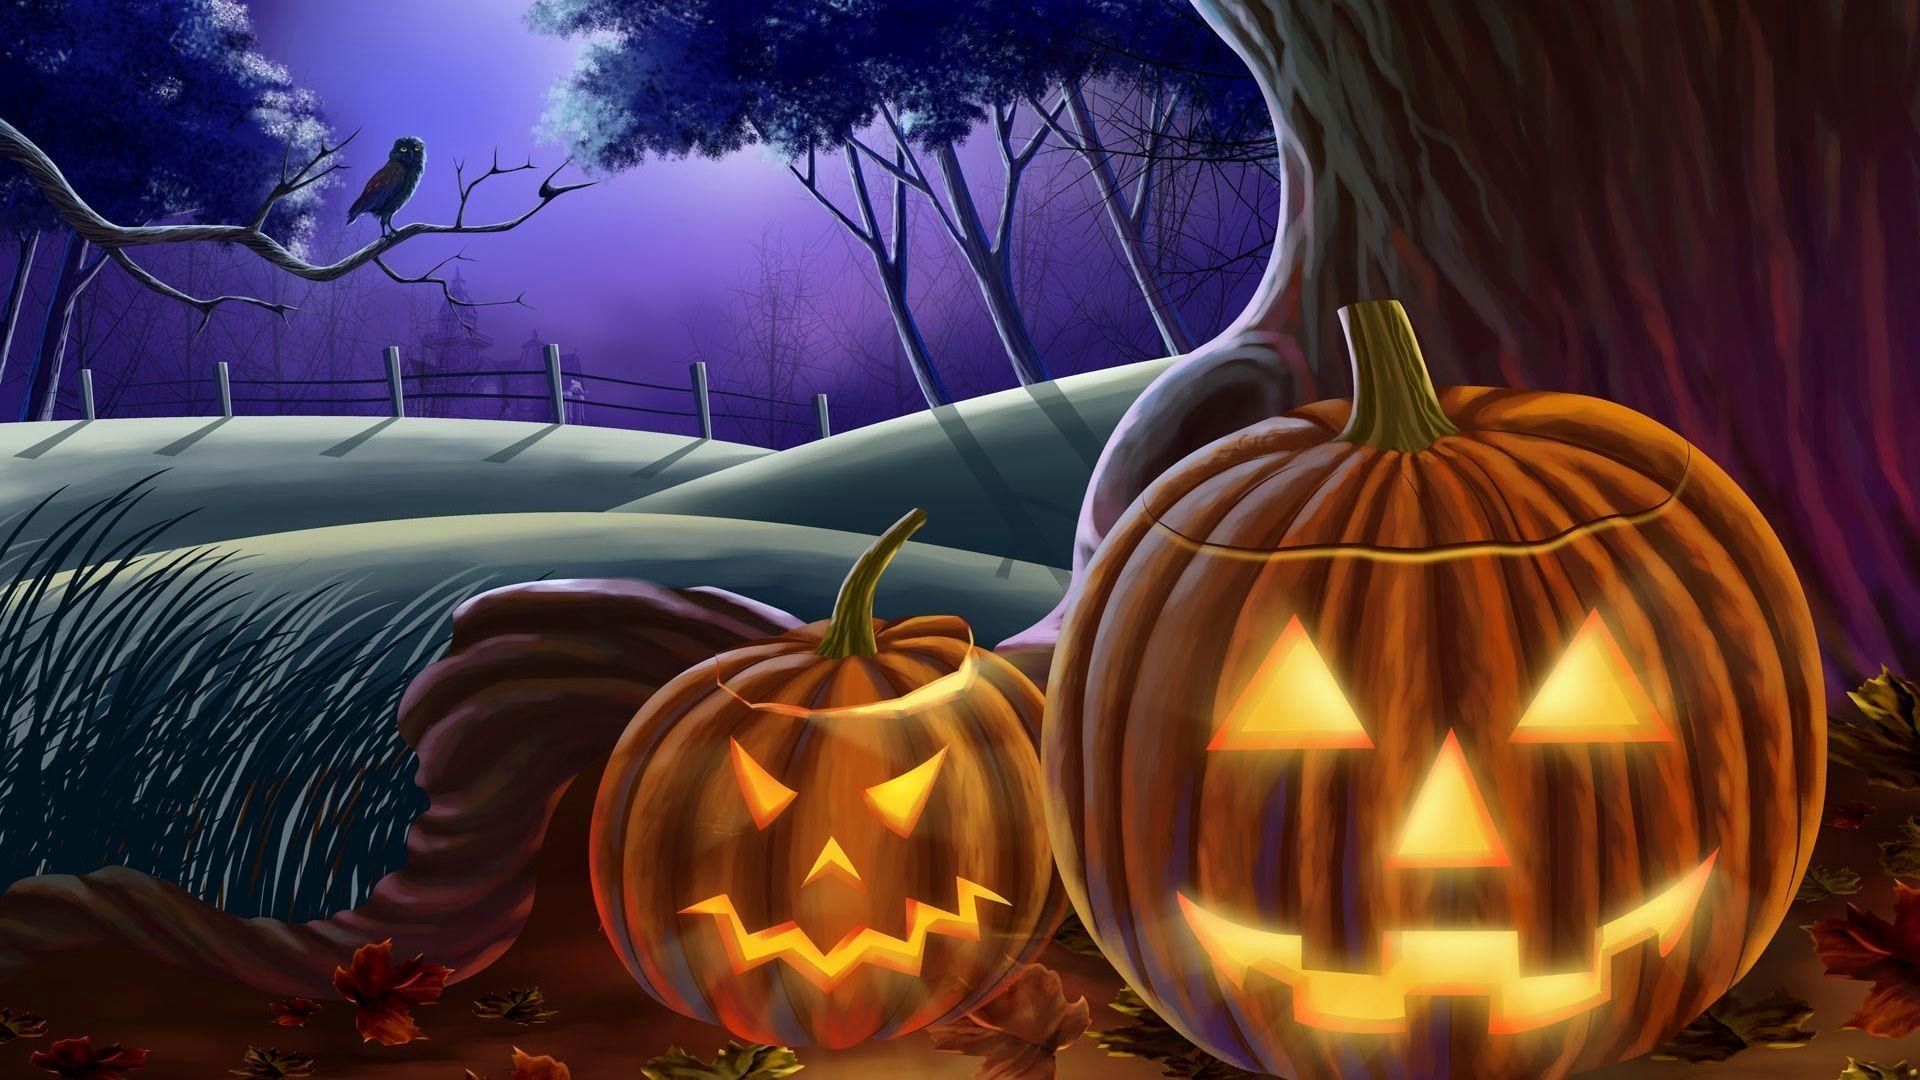 Awesome Halloween Background 1920x1080 2019